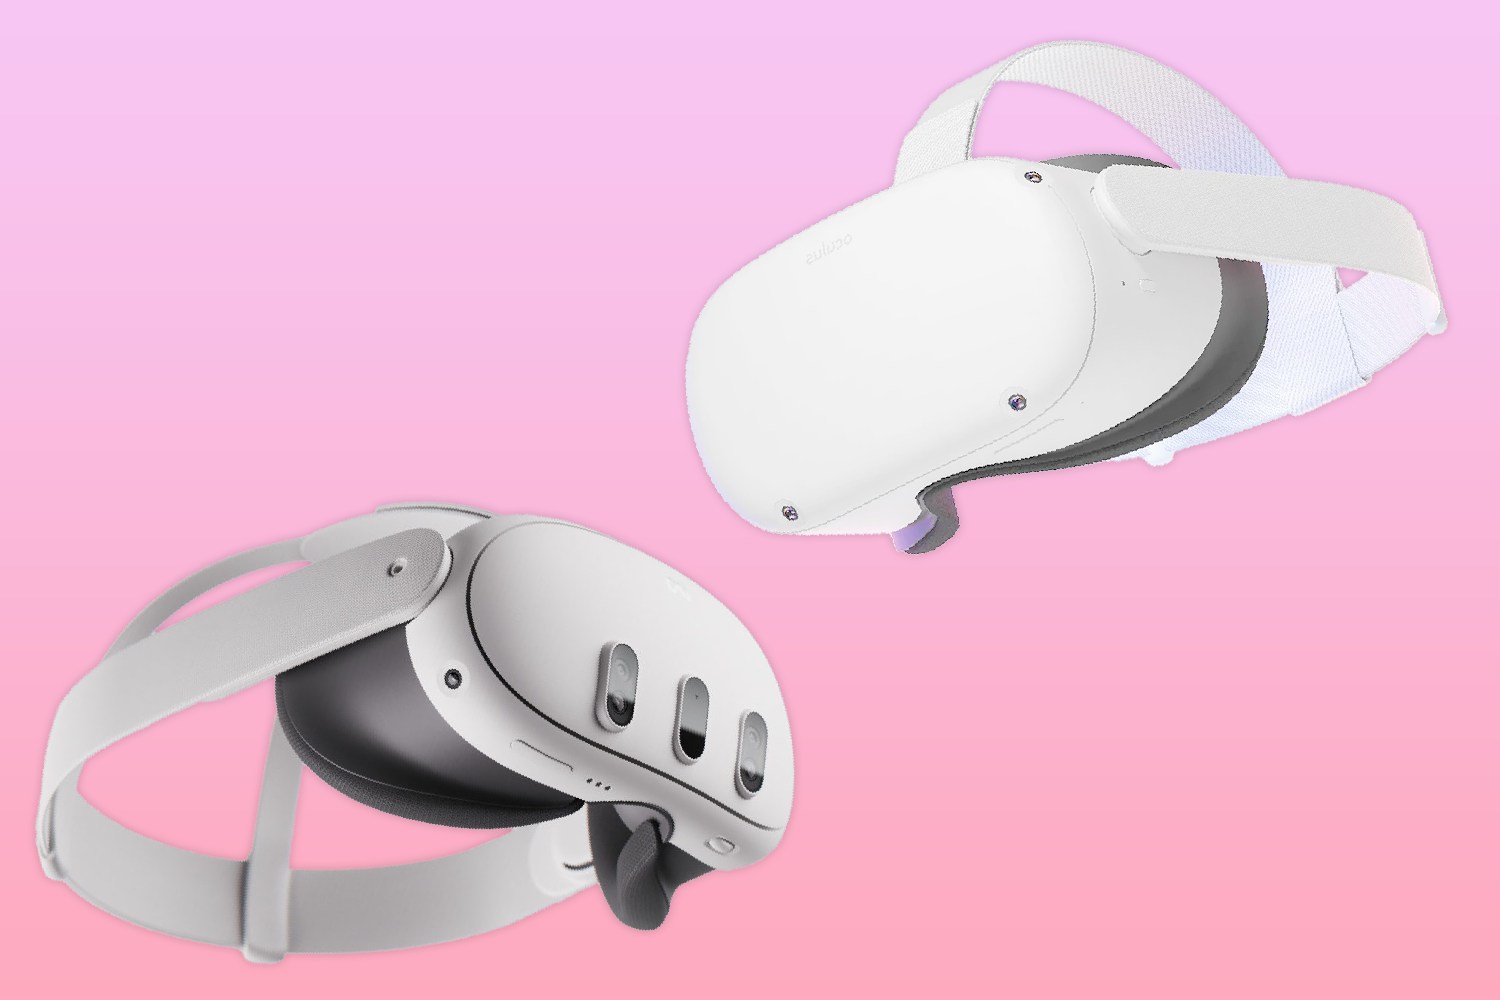 Meta Quest 3 mixed reality headset arrives 10th October, starting at £480